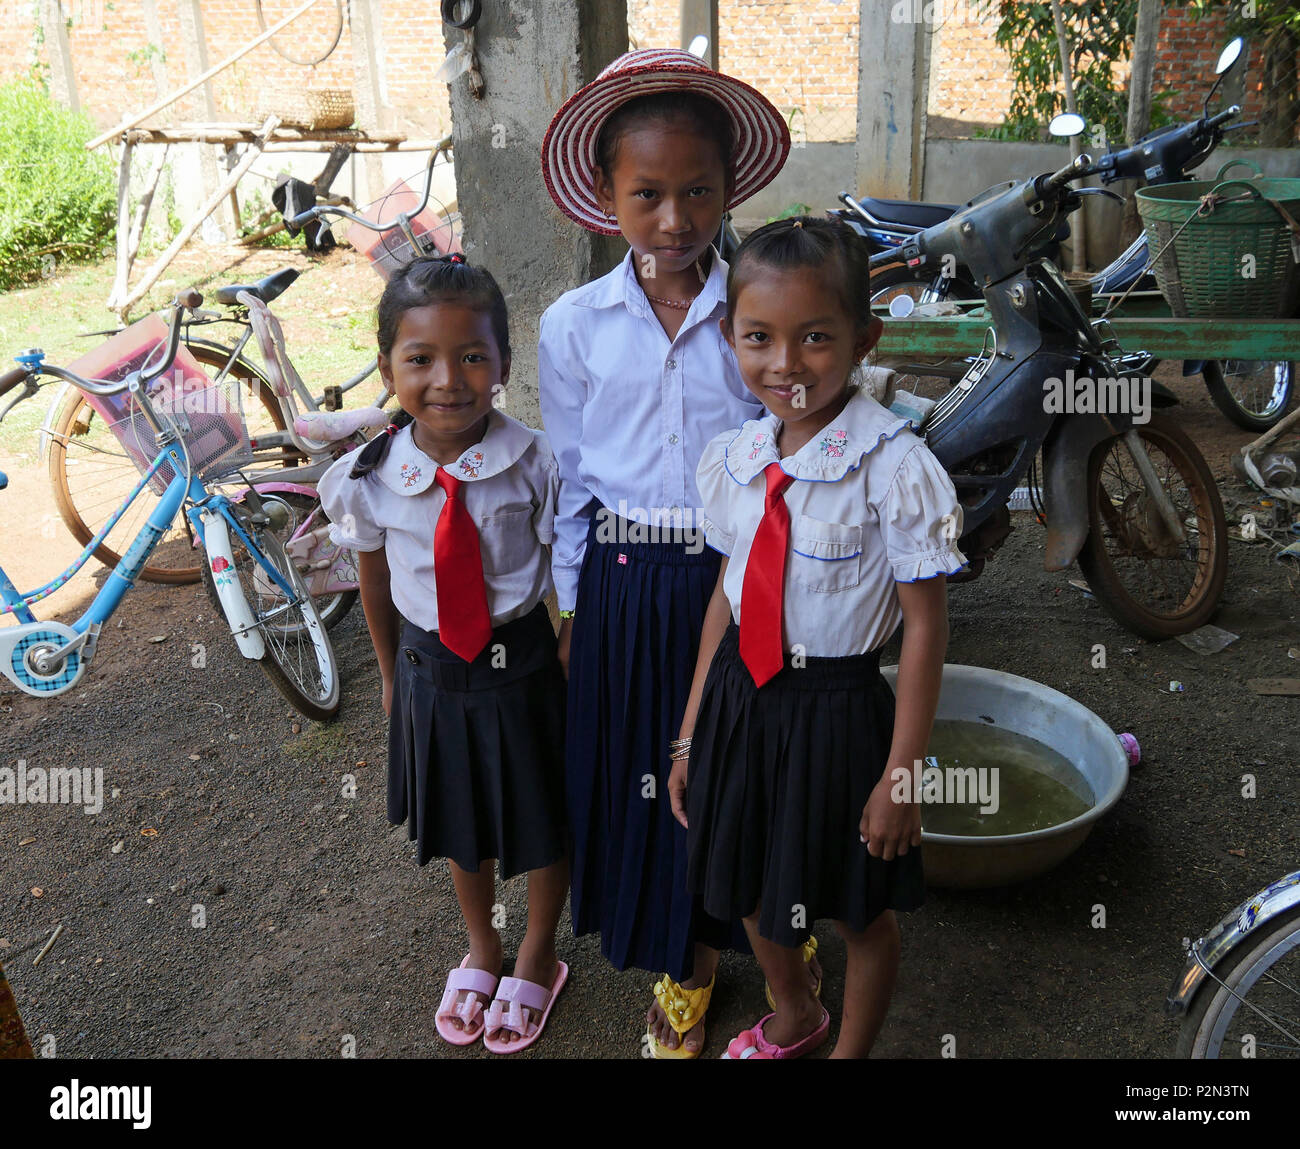 Cambodian schoolgirls, smartly dressed in their school uniform, ready to cycle to school at 07.00 in the morning. Kampong Thom province, Cambodia. Stock Photo